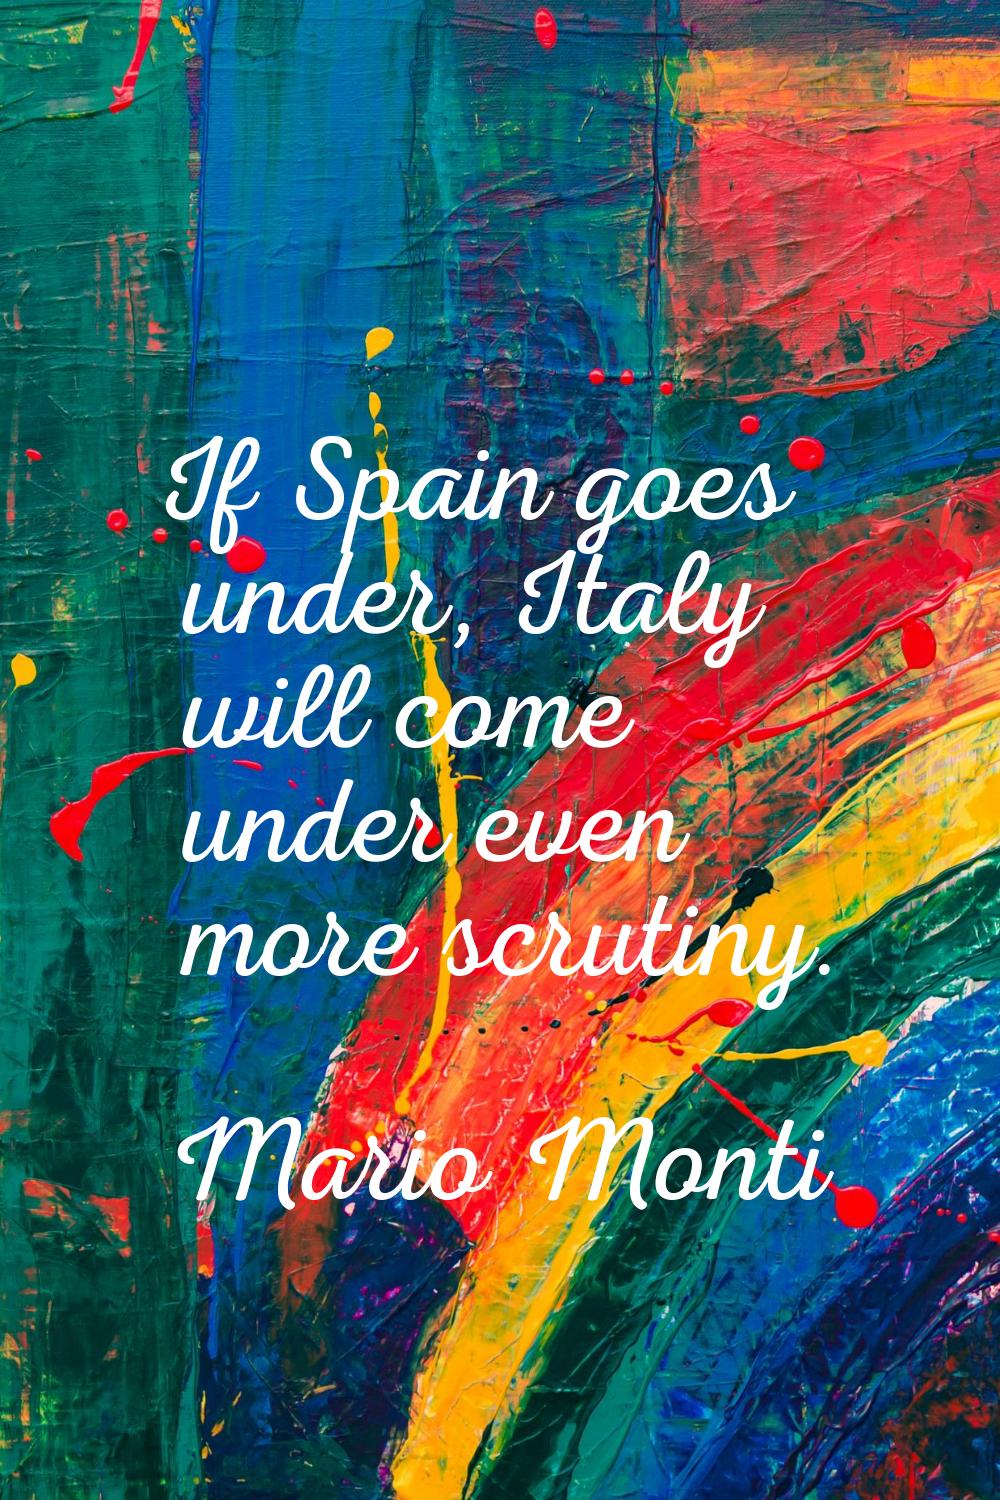 If Spain goes under, Italy will come under even more scrutiny.